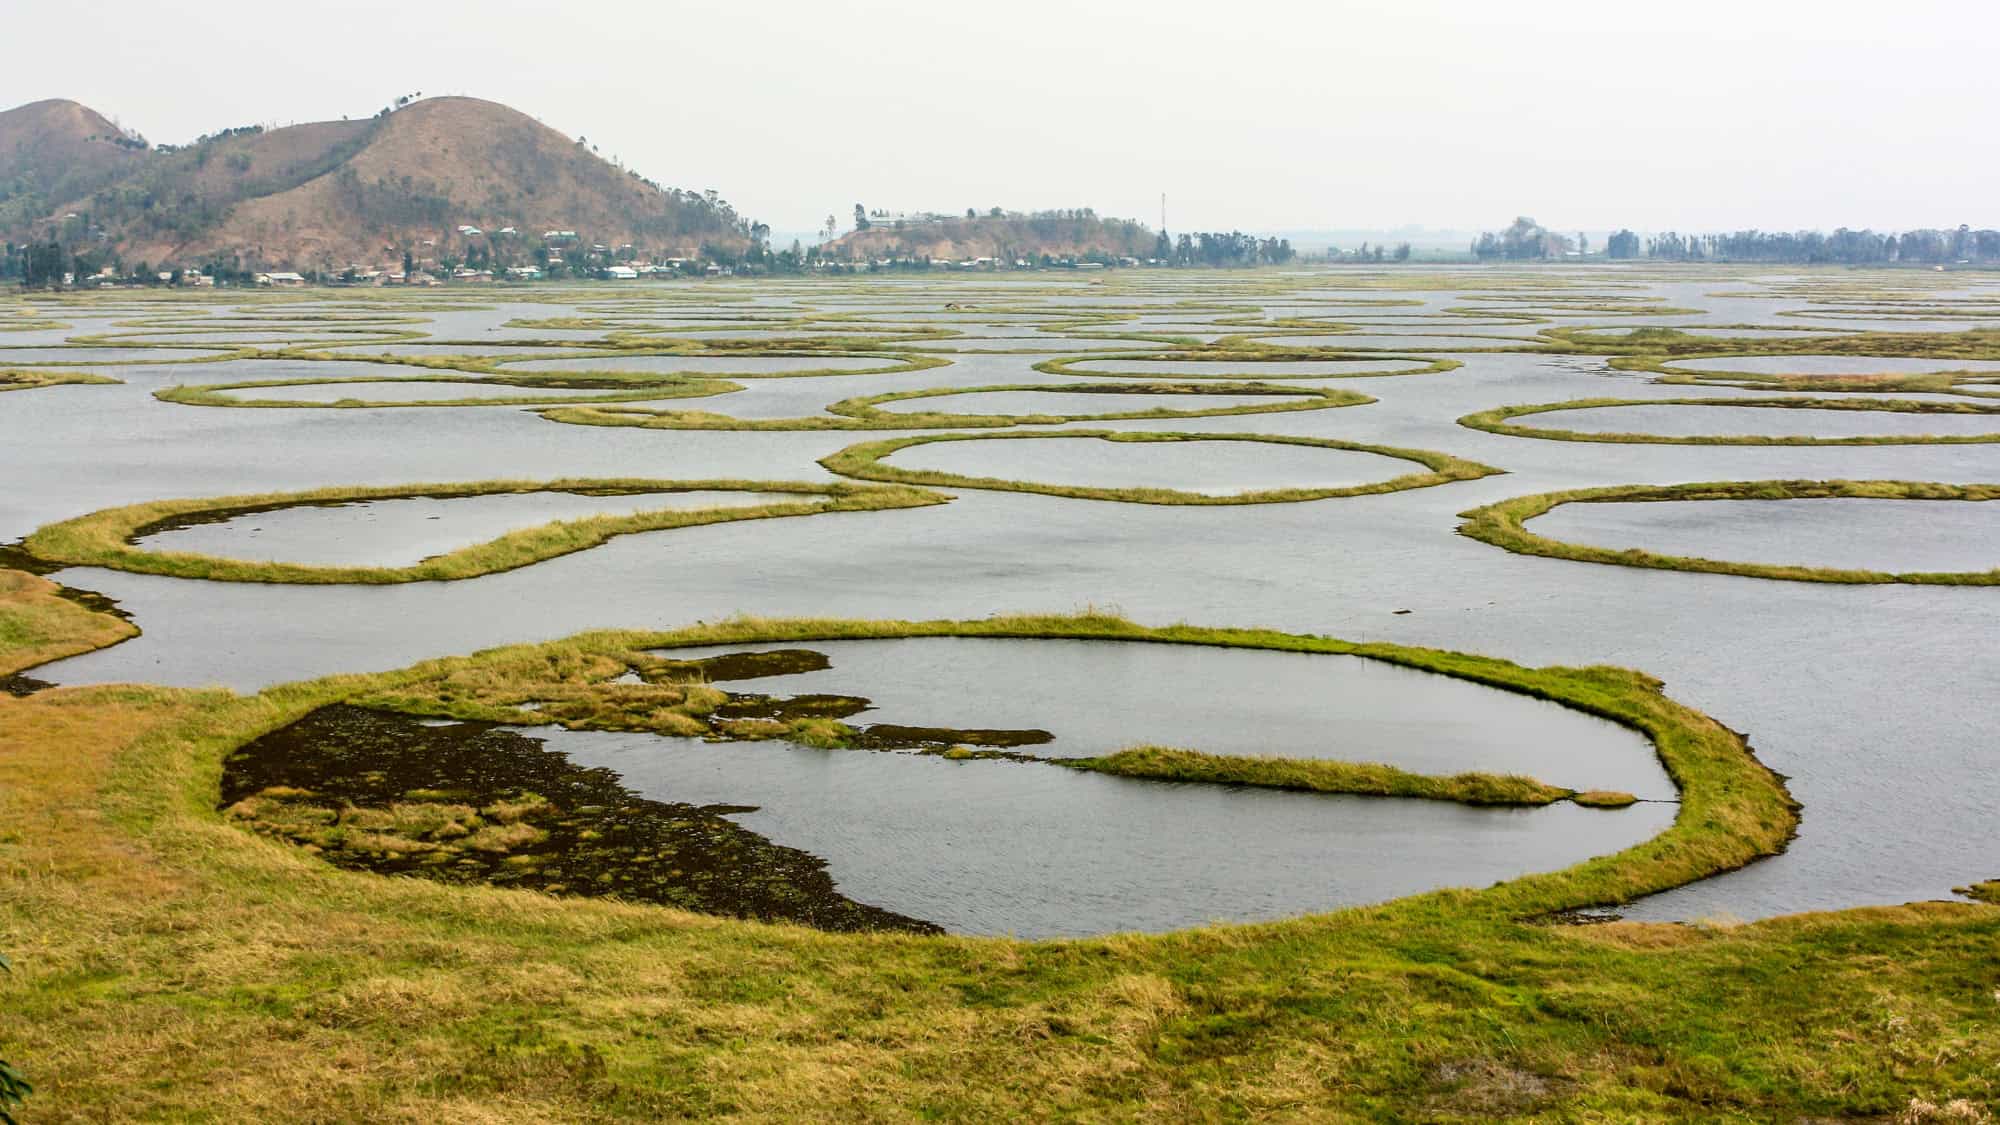 <p>Loktak Lake might look serene with its iconic floating islands, called Phumdi, but don’t be fooled. This place is a treacherous labyrinth, especially during monsoon season when the water level surges unpredictably. The lake’s currents beneath those islands are about as predictable as winning the lottery, and they can trap and capsize boats with casual ease. </p> <p>To top it off, the dense patches of floating vegetation hide these dangers from plain sight, making navigation a nightmare. Plus, <strong>the thick reeds can entangle swimmers</strong> faster than a web of lies, making every dip more dangerous than it initially appears.</p>